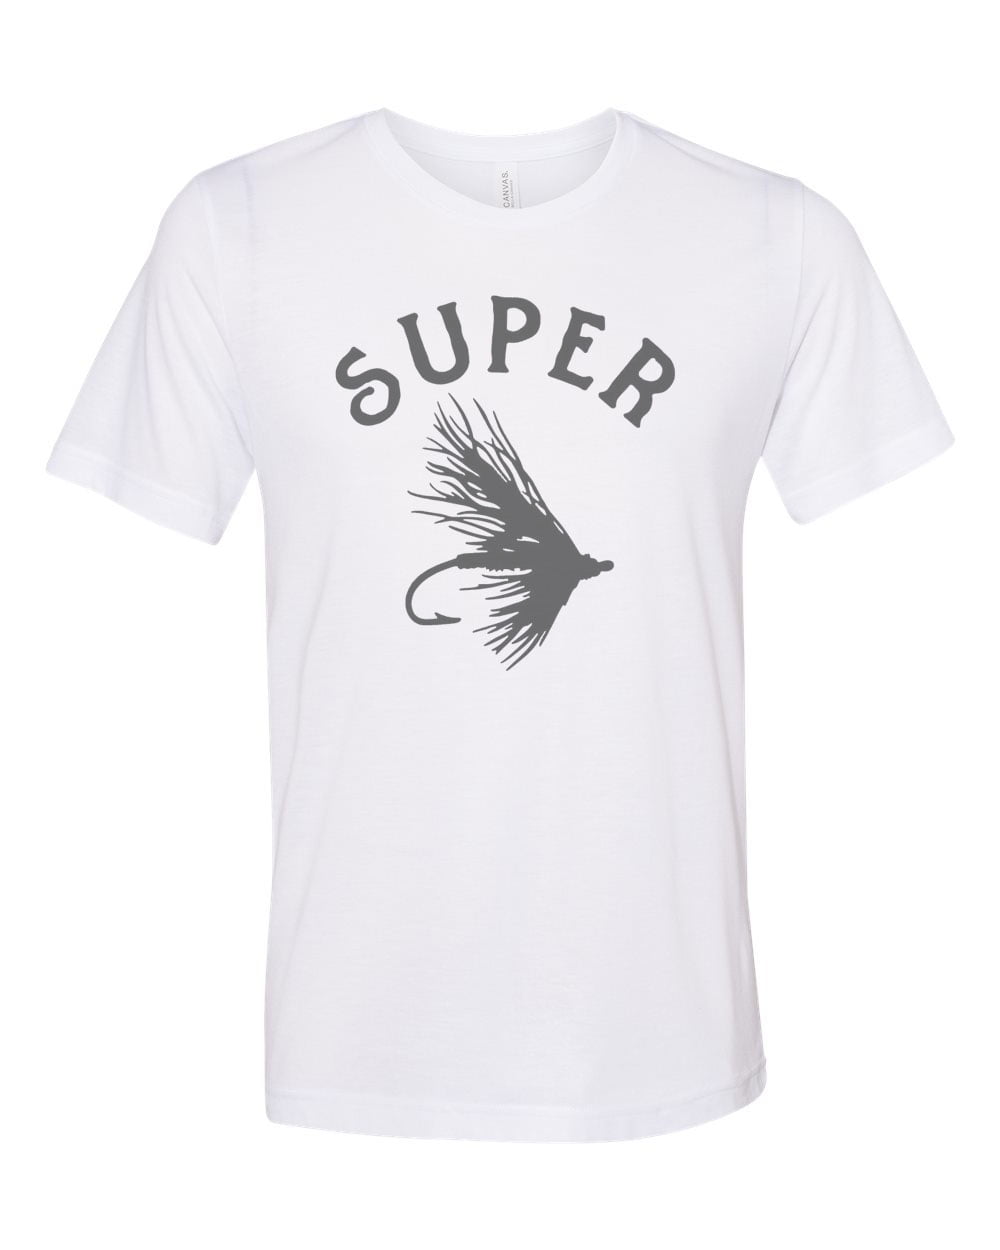 Fly Fishing Shirt, Super Fly, Fly Fishing Apparel, Sublimation T, Unisex  Tee, Fishing Tee, Fishing Shirt, Dad Gift, Trout Fishing Shirt, White, Large